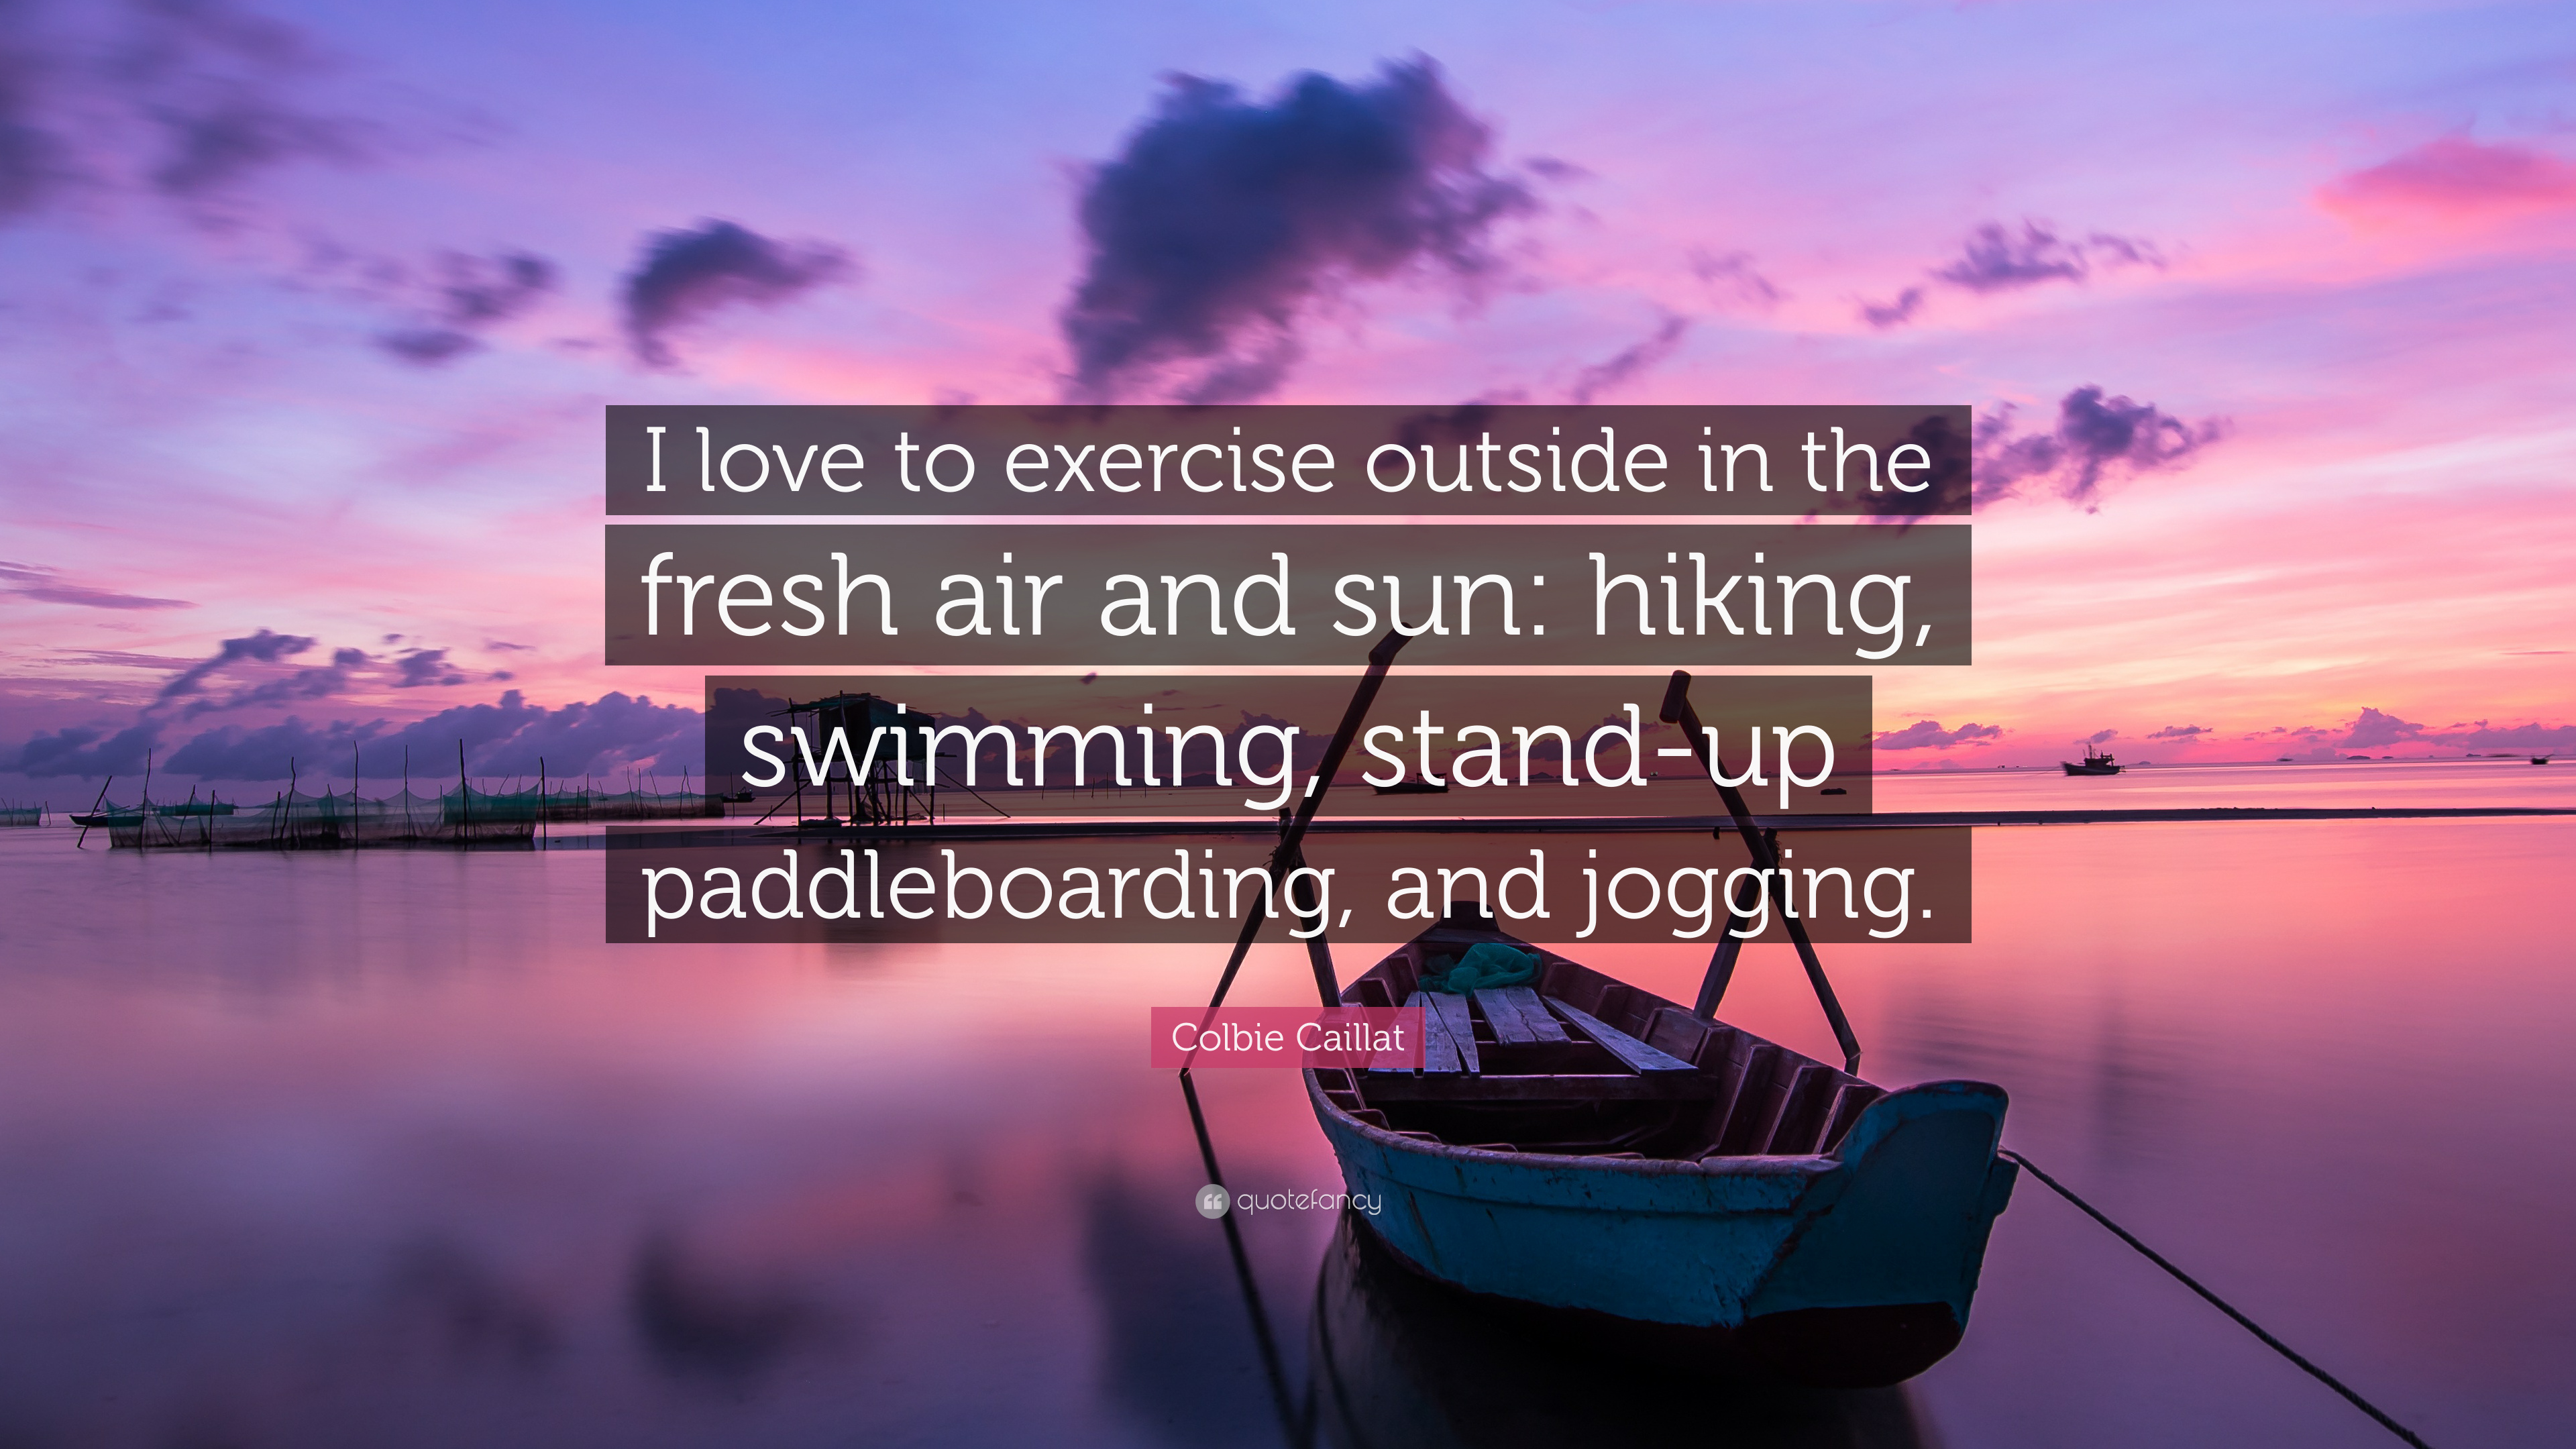 Colbie Caillat Quote: “I love to exercise outside in the fresh air